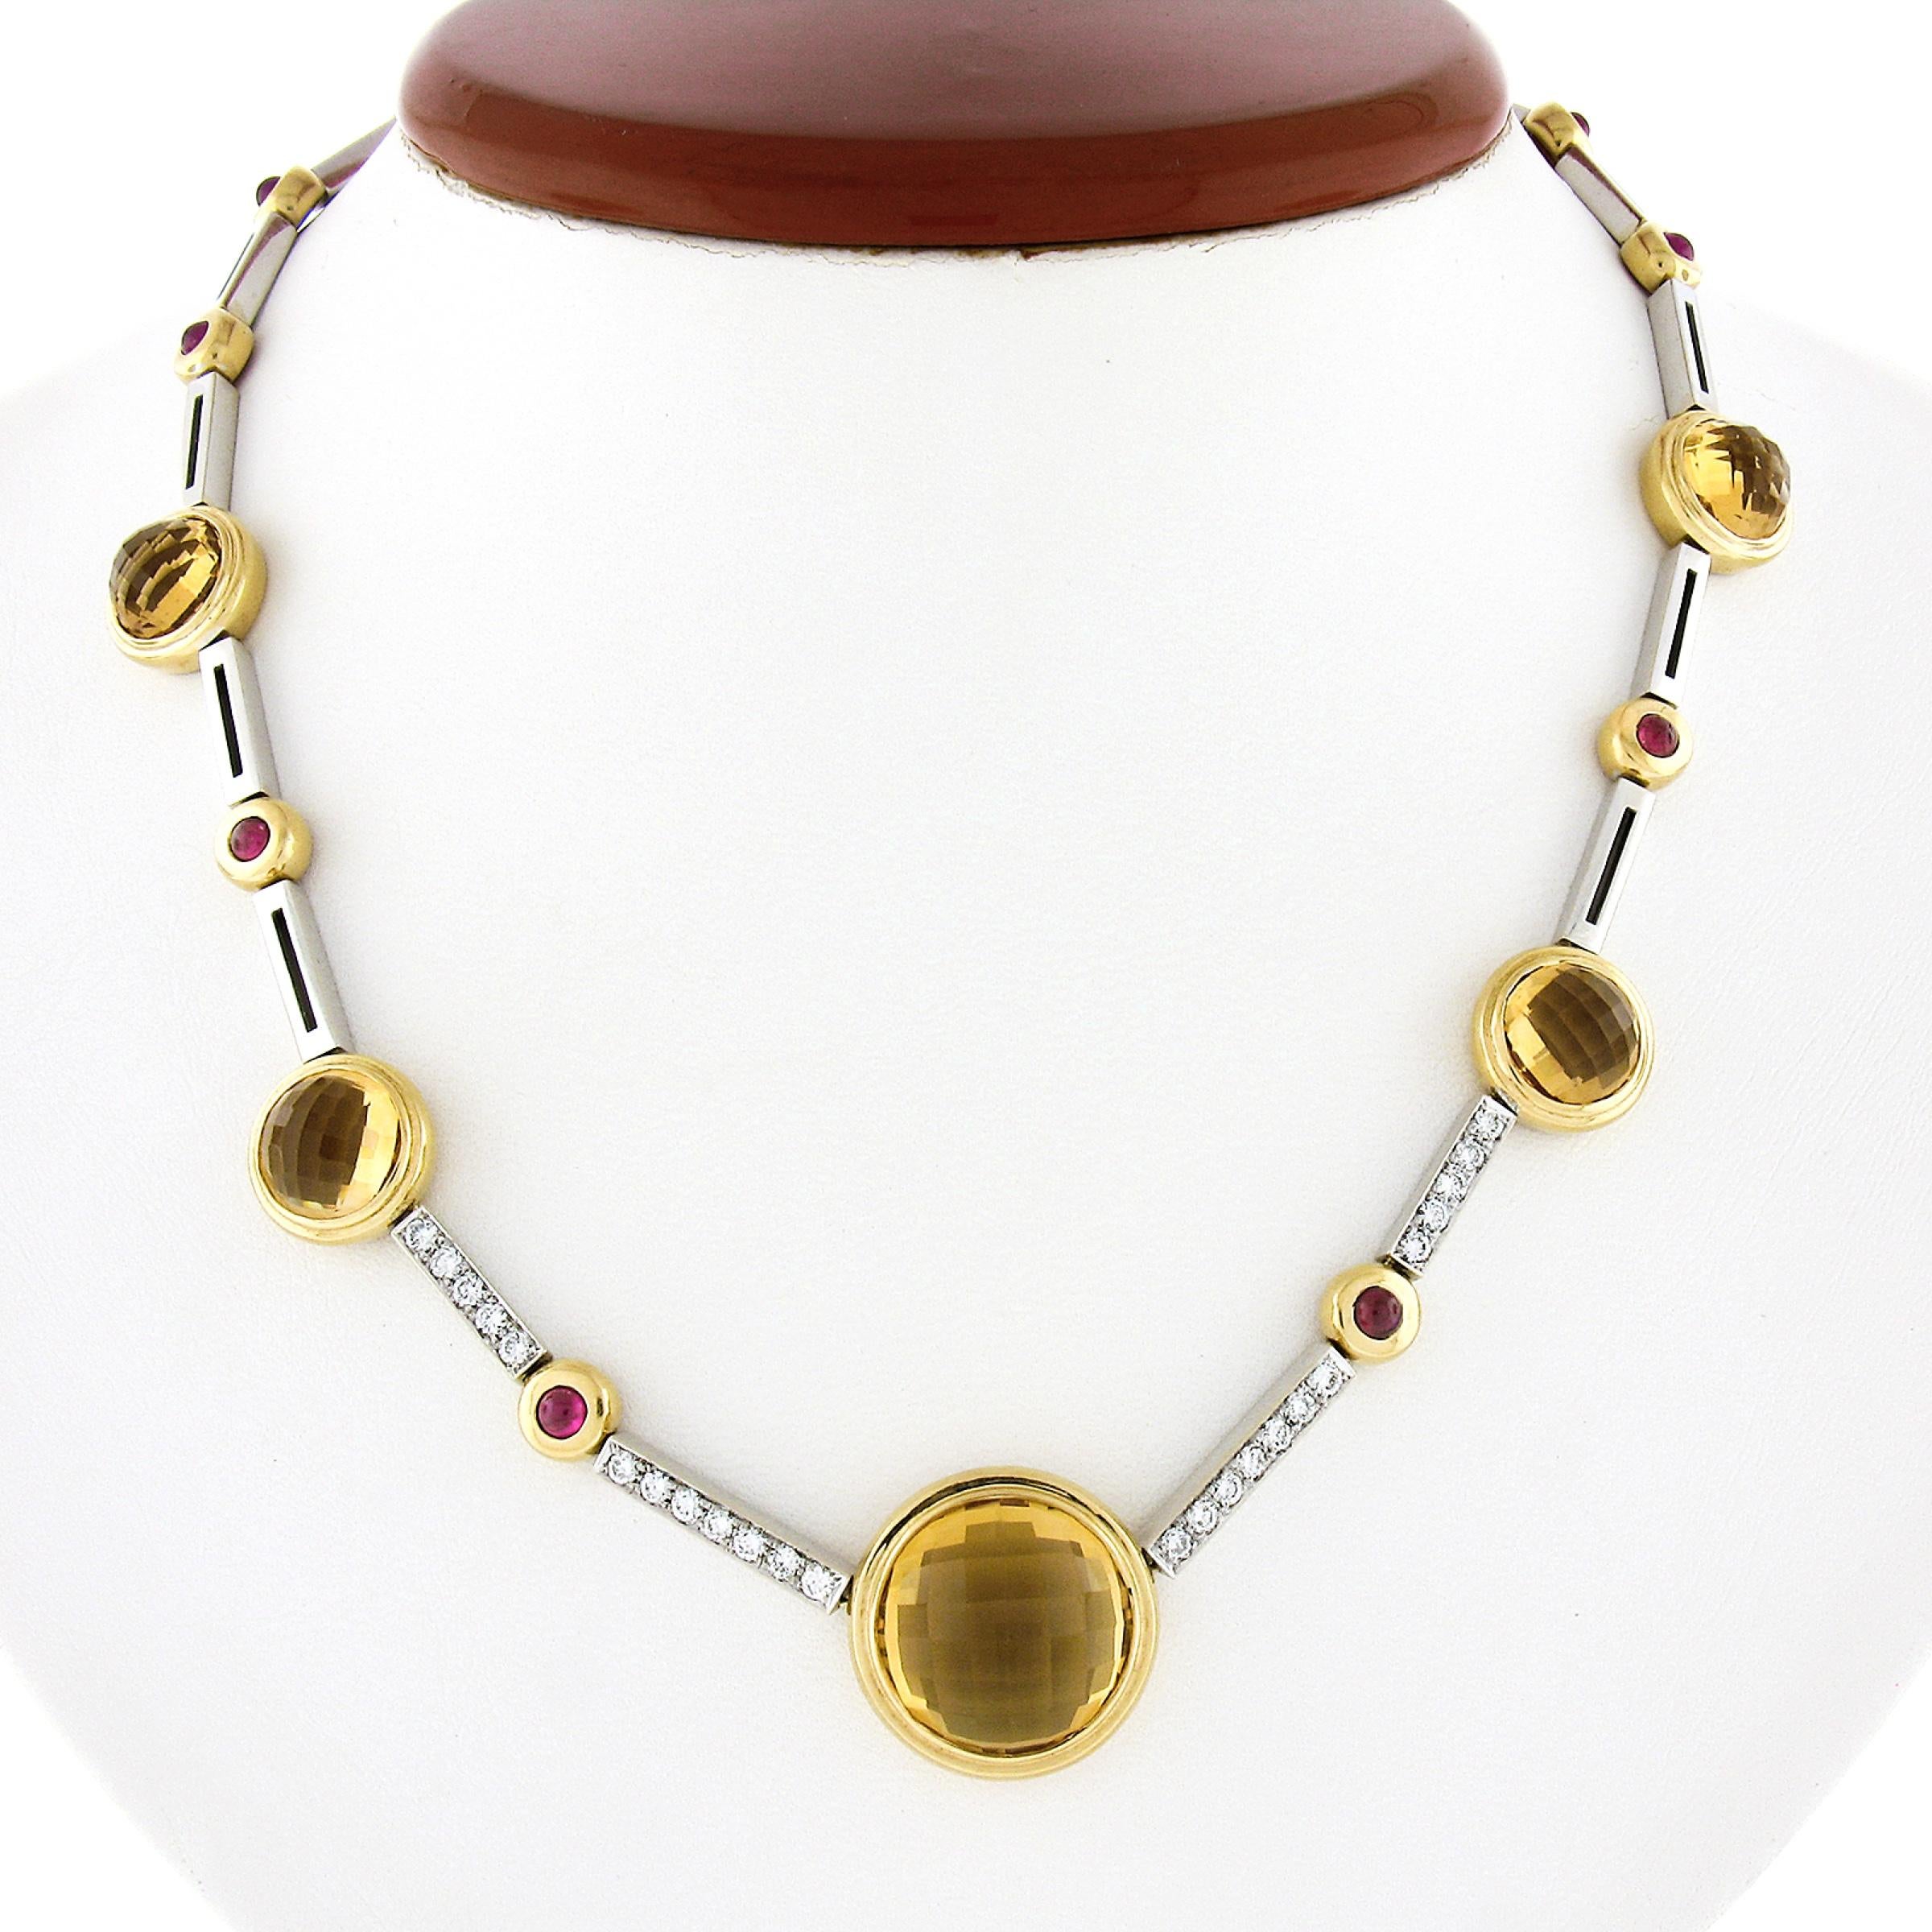 Here we have a gorgeous and very well made necklace that is crafted from solid 18k white and yellow gold and designed by Antonini. The necklace features fine citrine stones that are neatly bezel set throughout with the largest at its center, showing